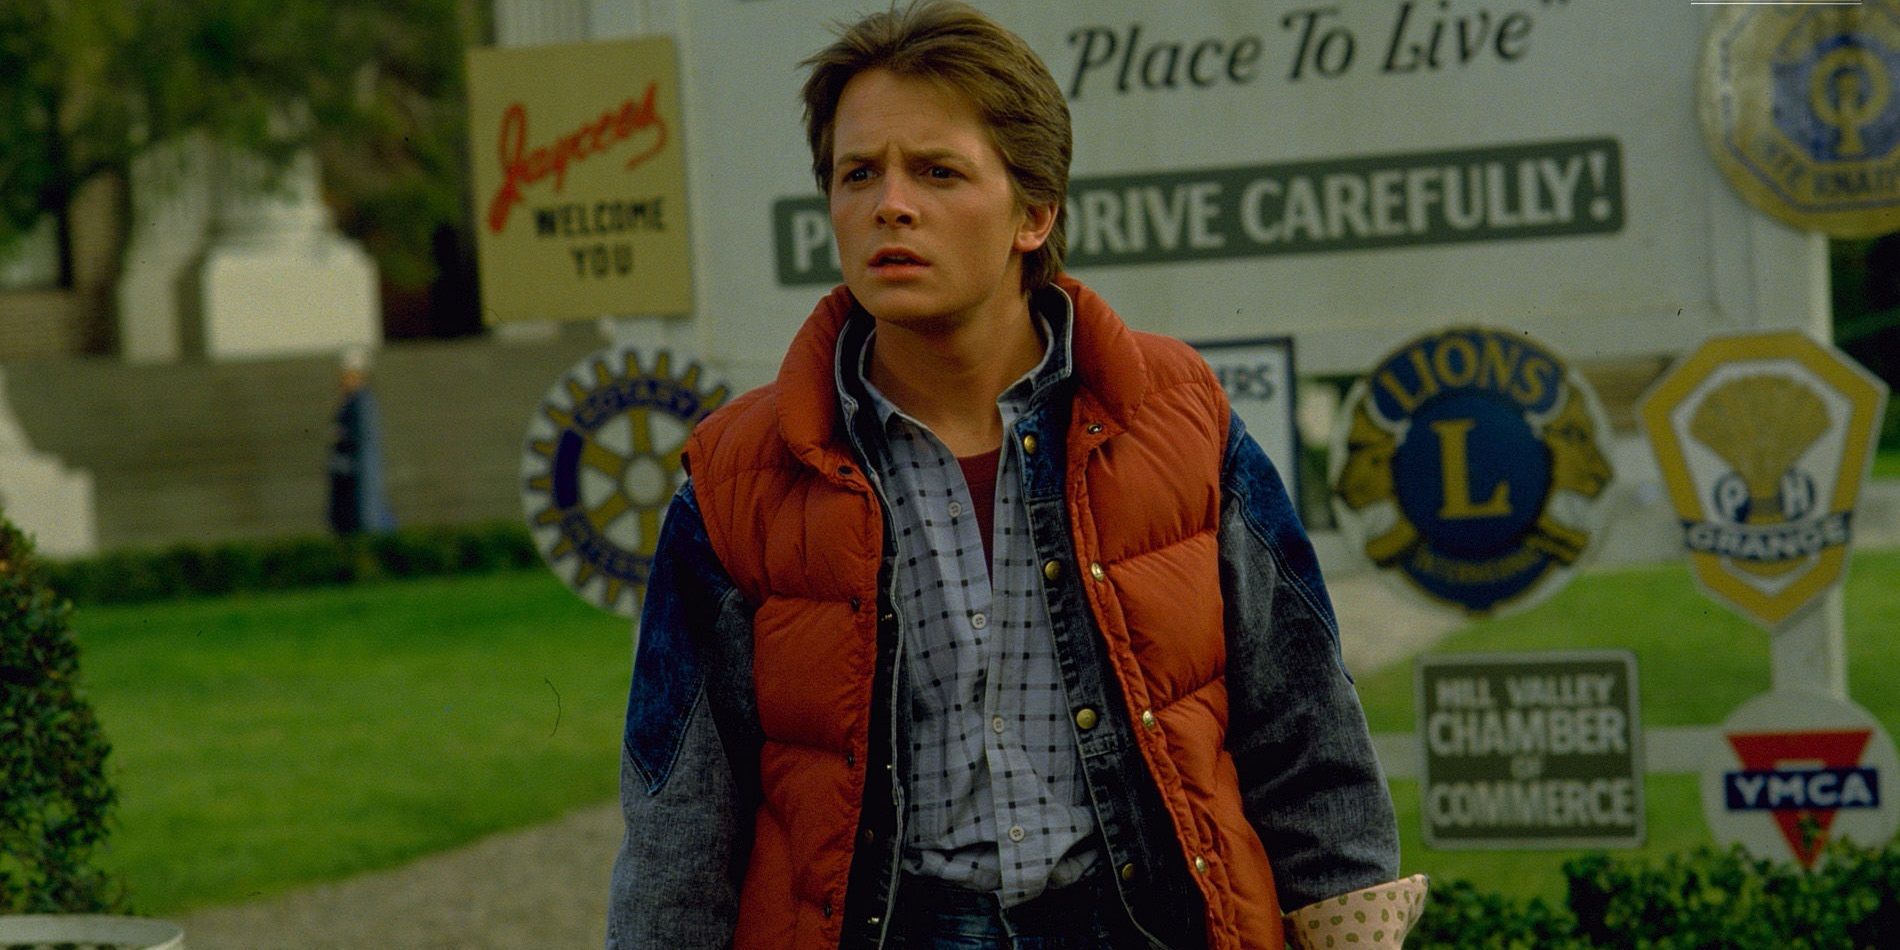 A picture of Michael J Fox as Marty McFly in Back to the Future is shown.